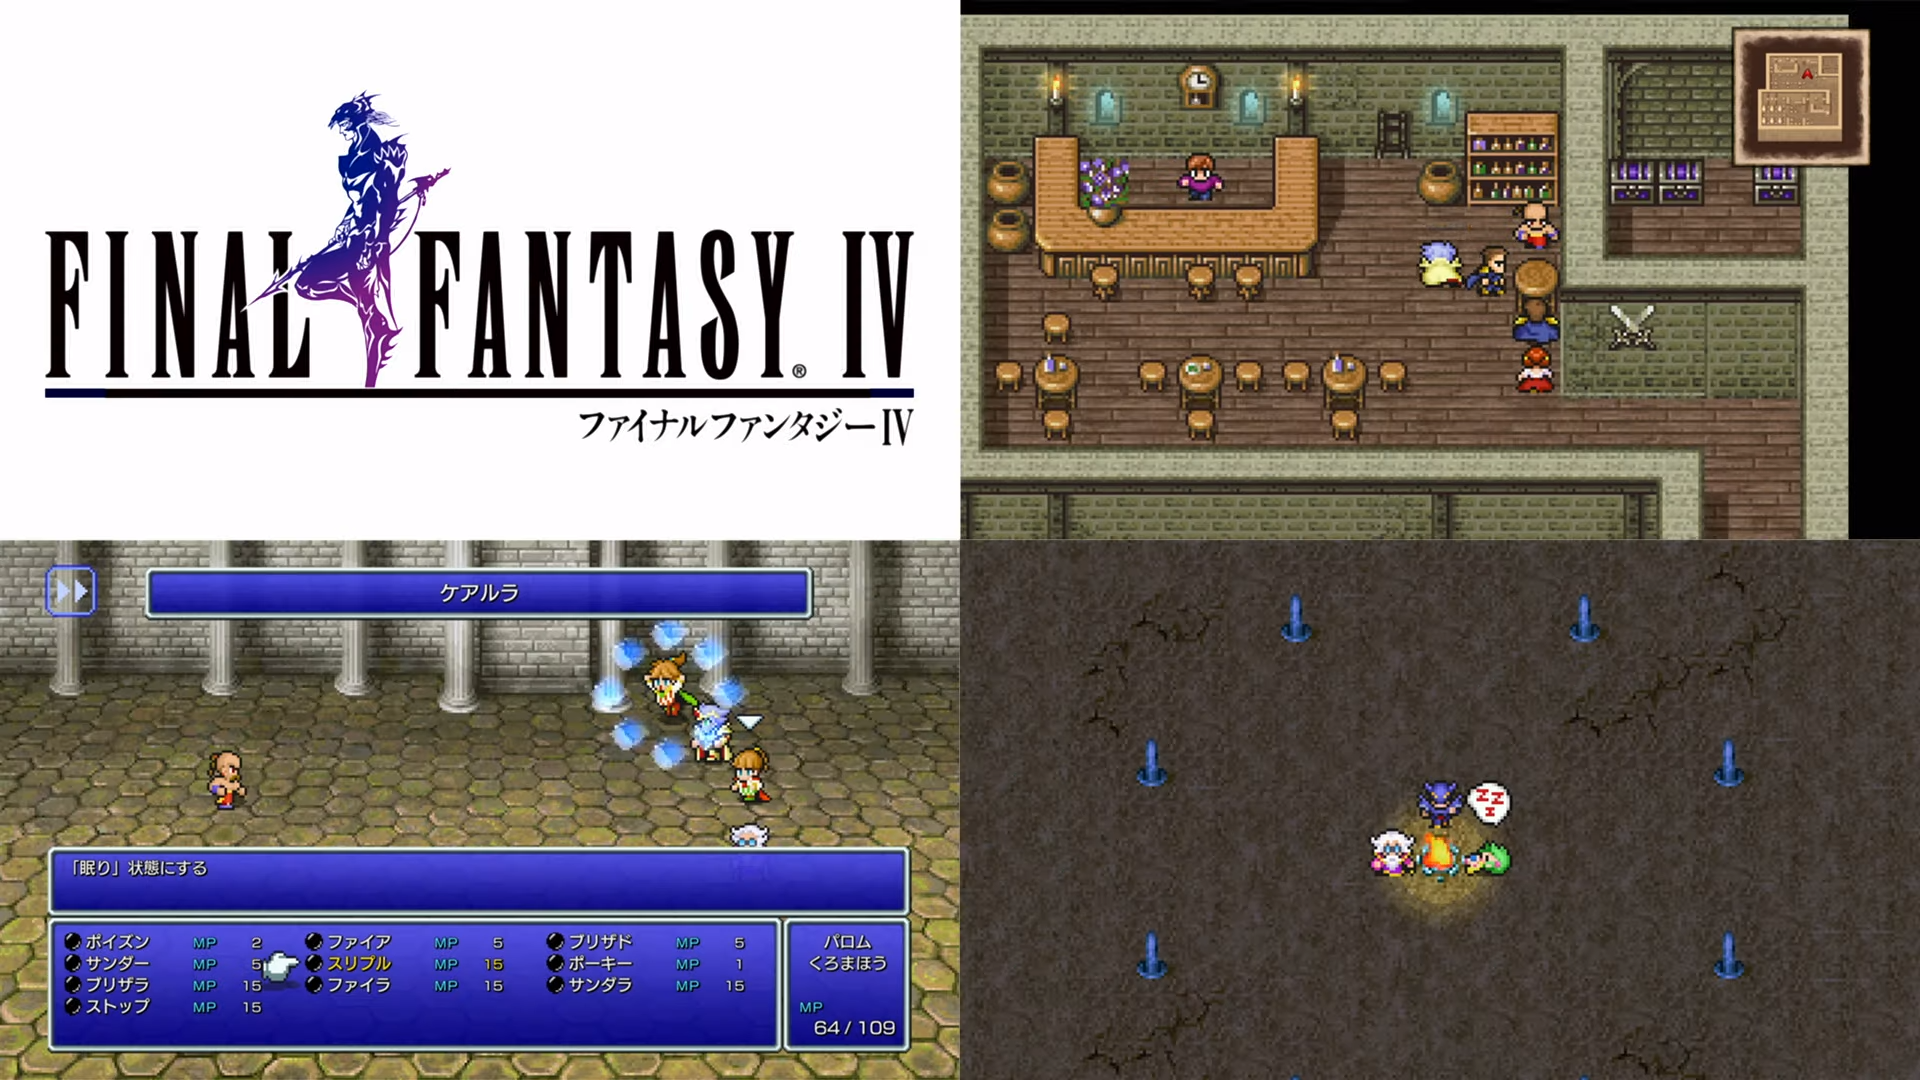 download ff6 pixel remaster review